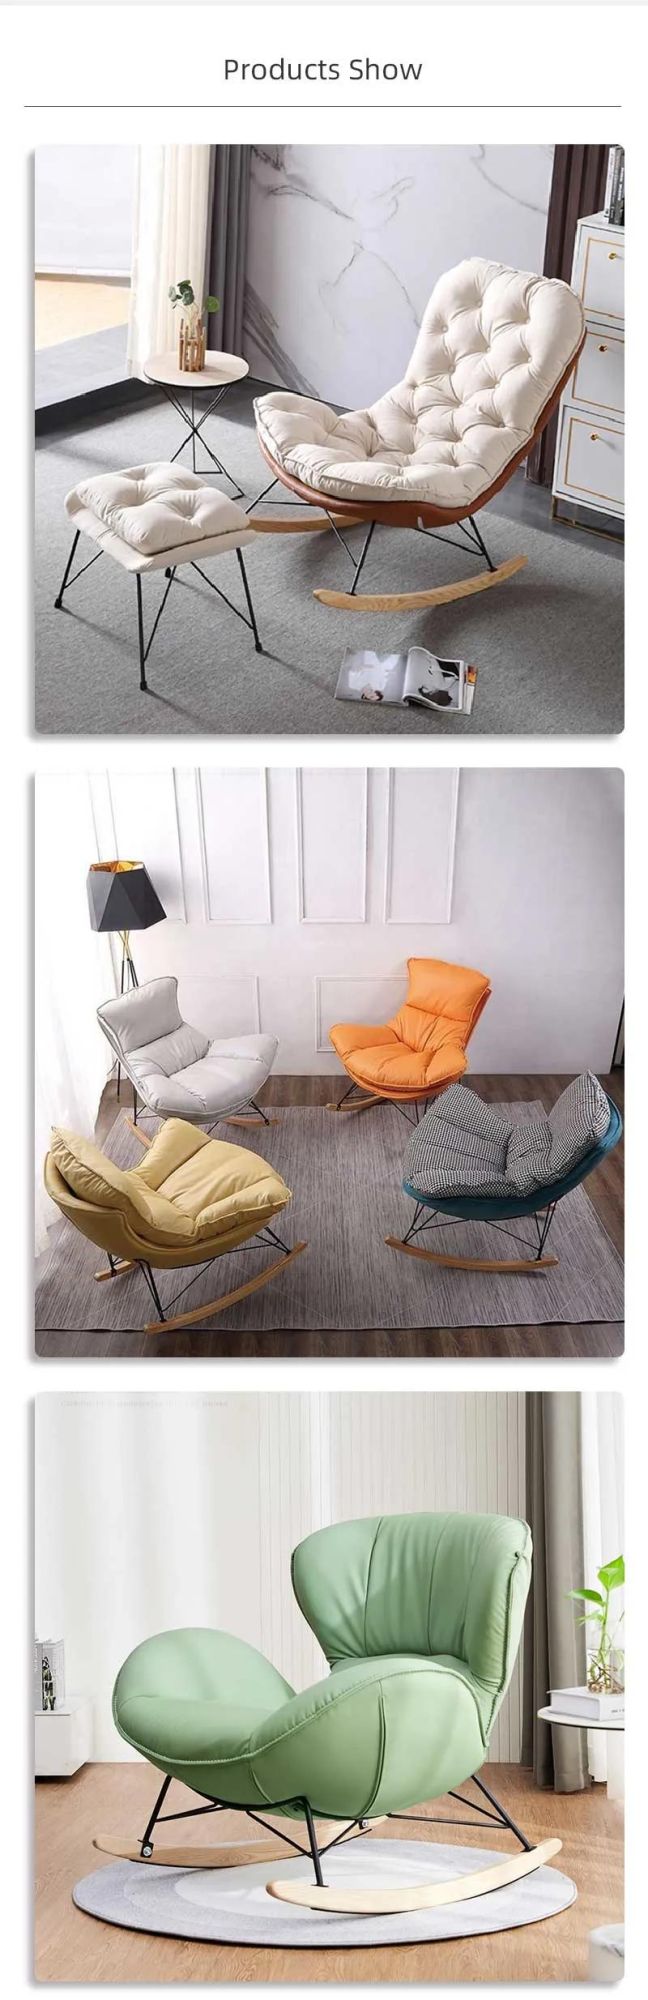 Living Room Hotel Balcony Home Furniture Leisure Fabric Rocking Chair